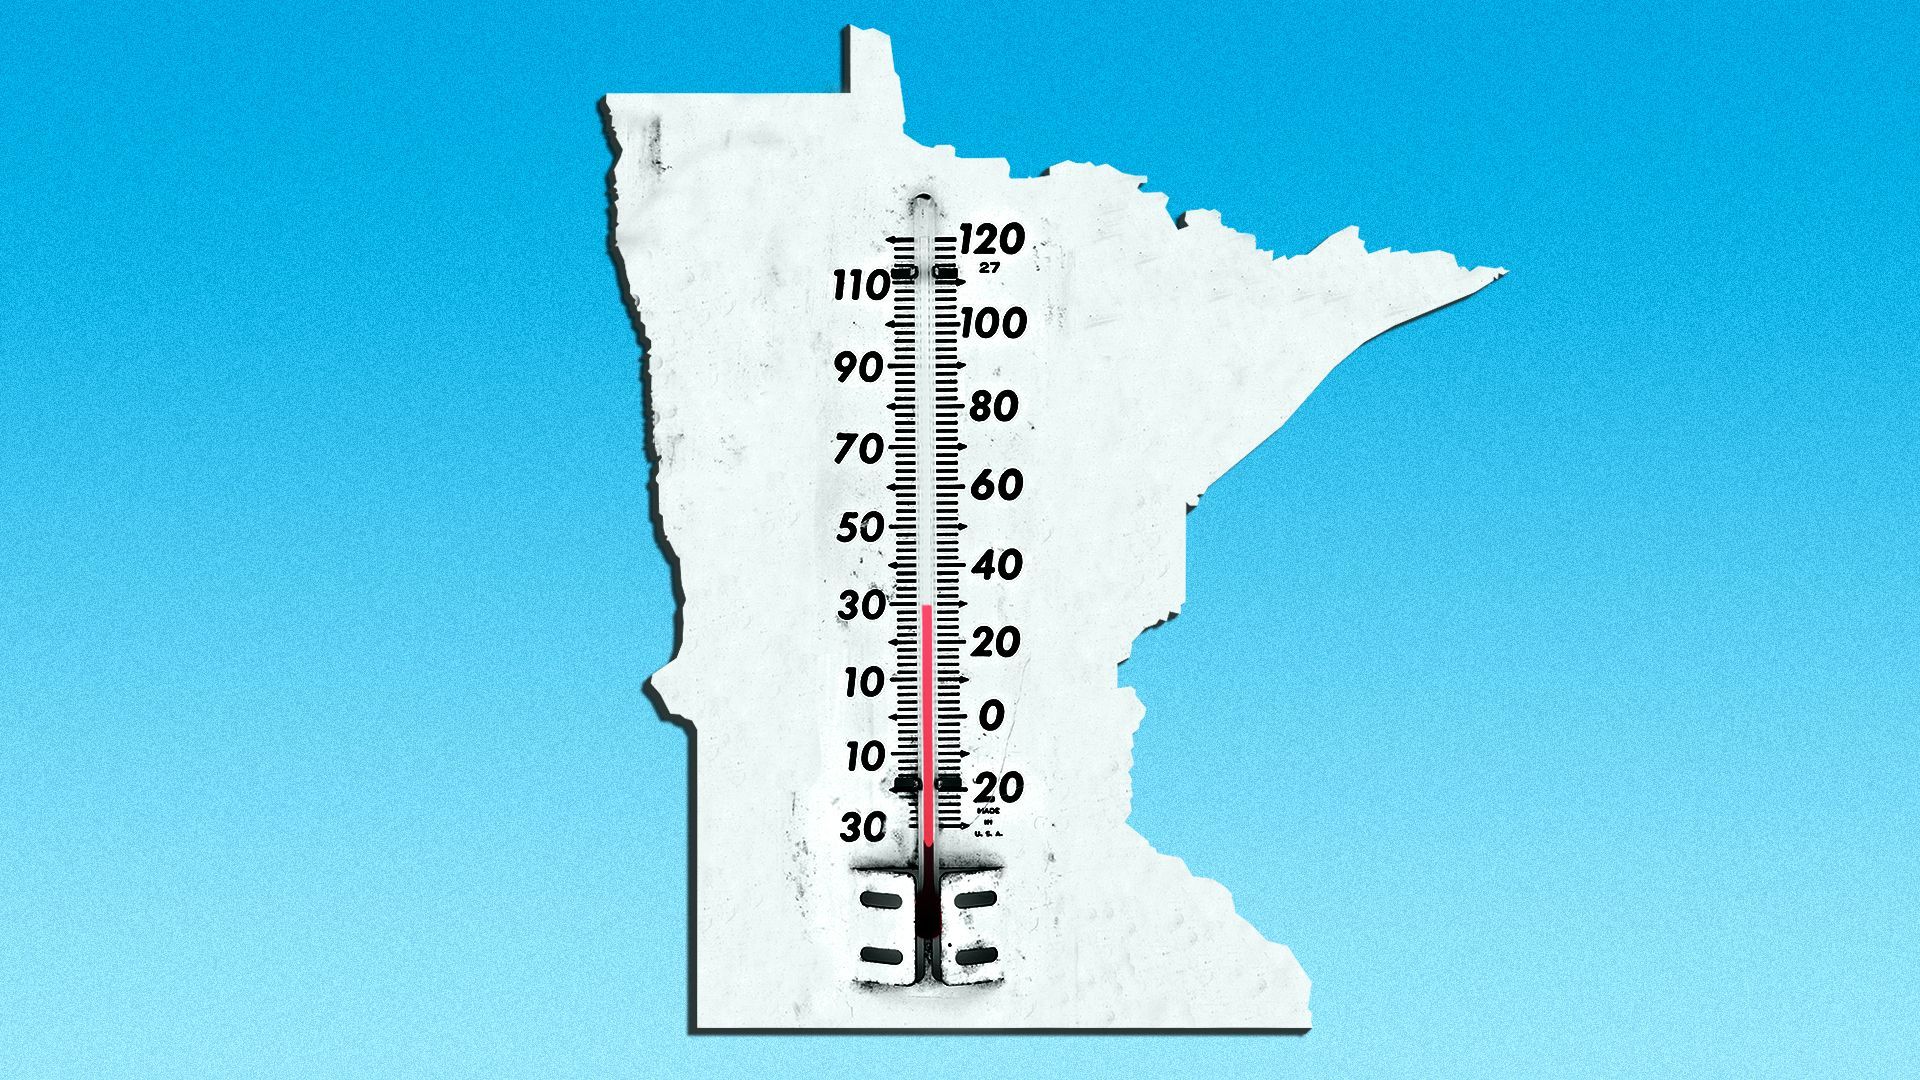 Illustration of a thermometer in the shape of Minnesota registering 30 degrees.